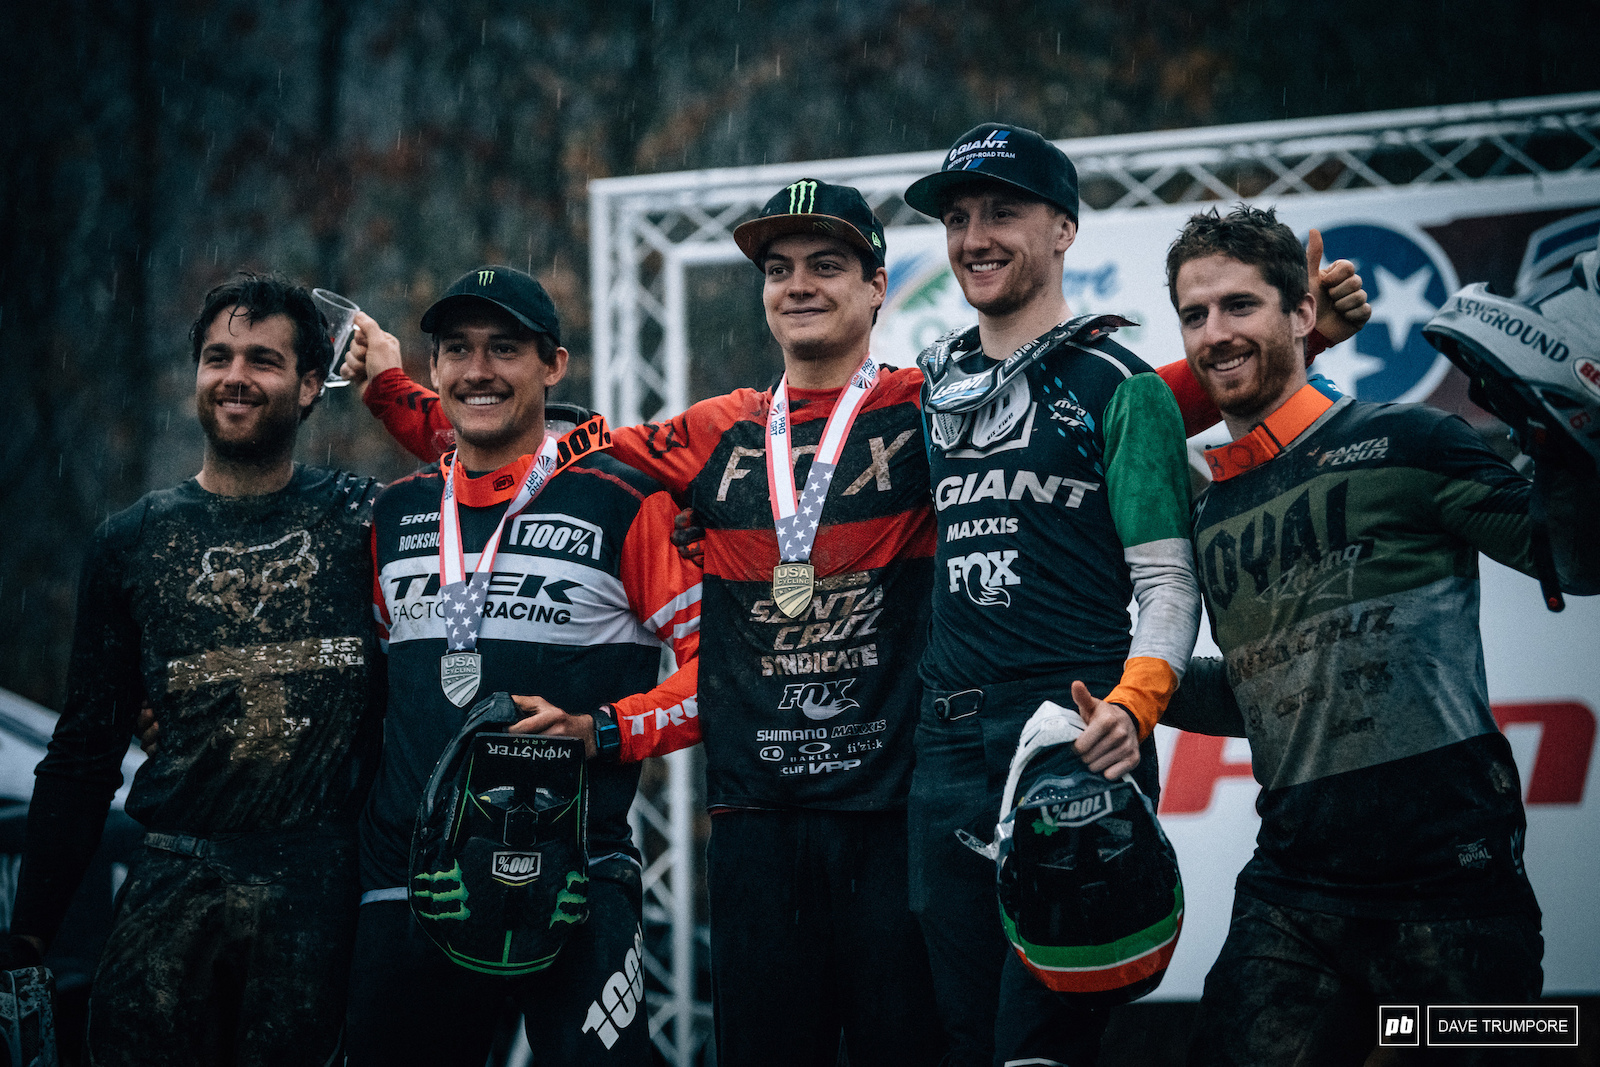 the top 5 men at the opening round of the 2019 Pro GRT series.